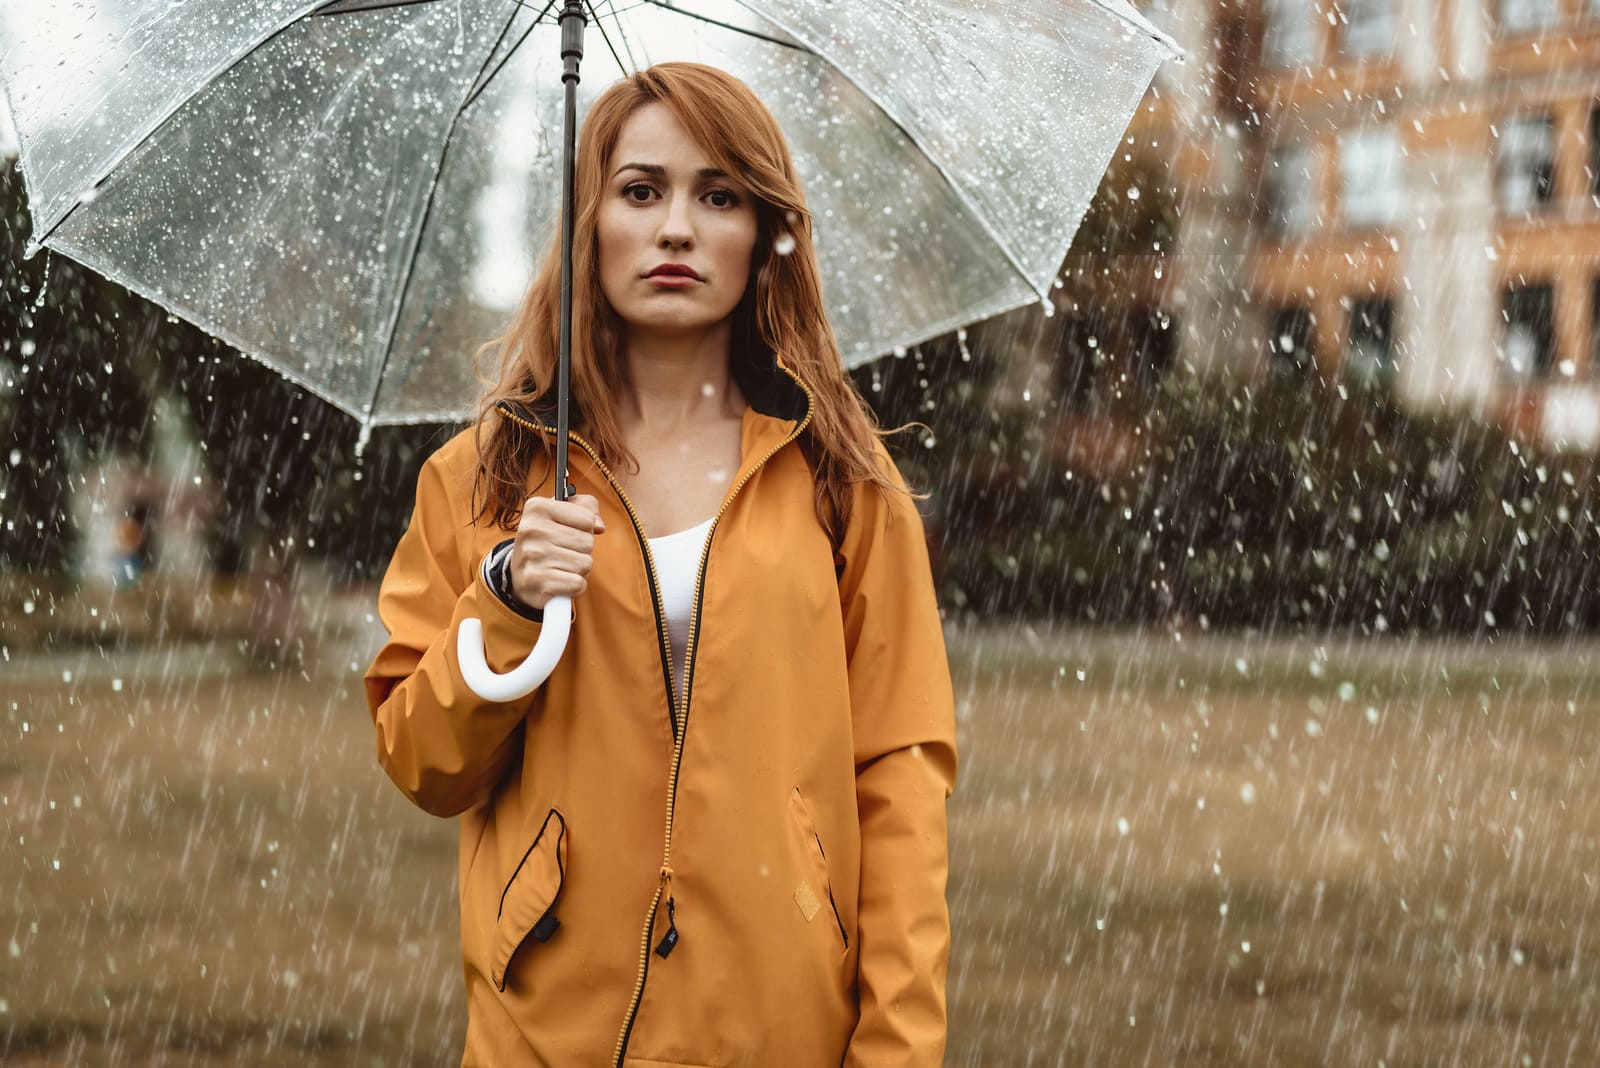 a woman in a yellow coat with an umbrella walks in the rain